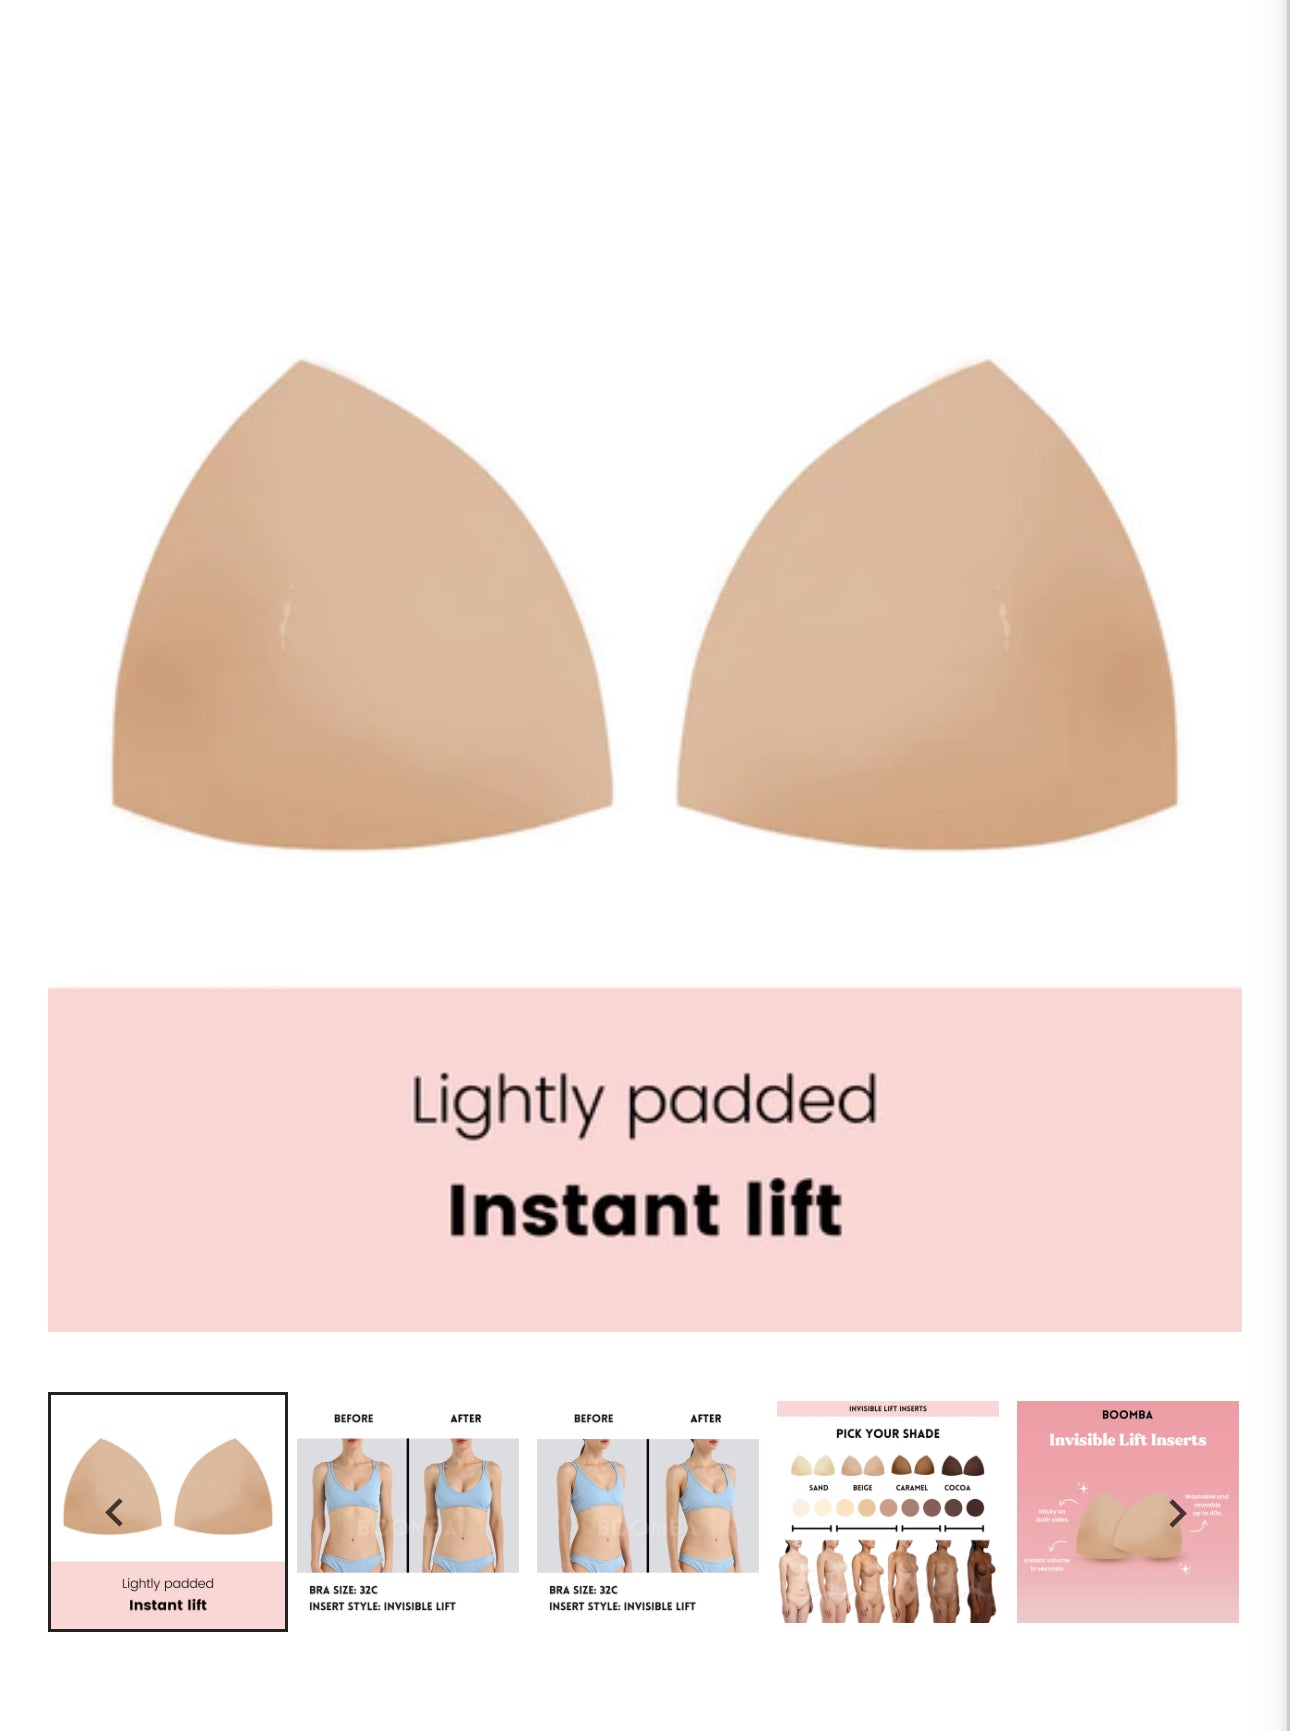 Boomba Invisible Lift Inserts – Kate and Hale Shop